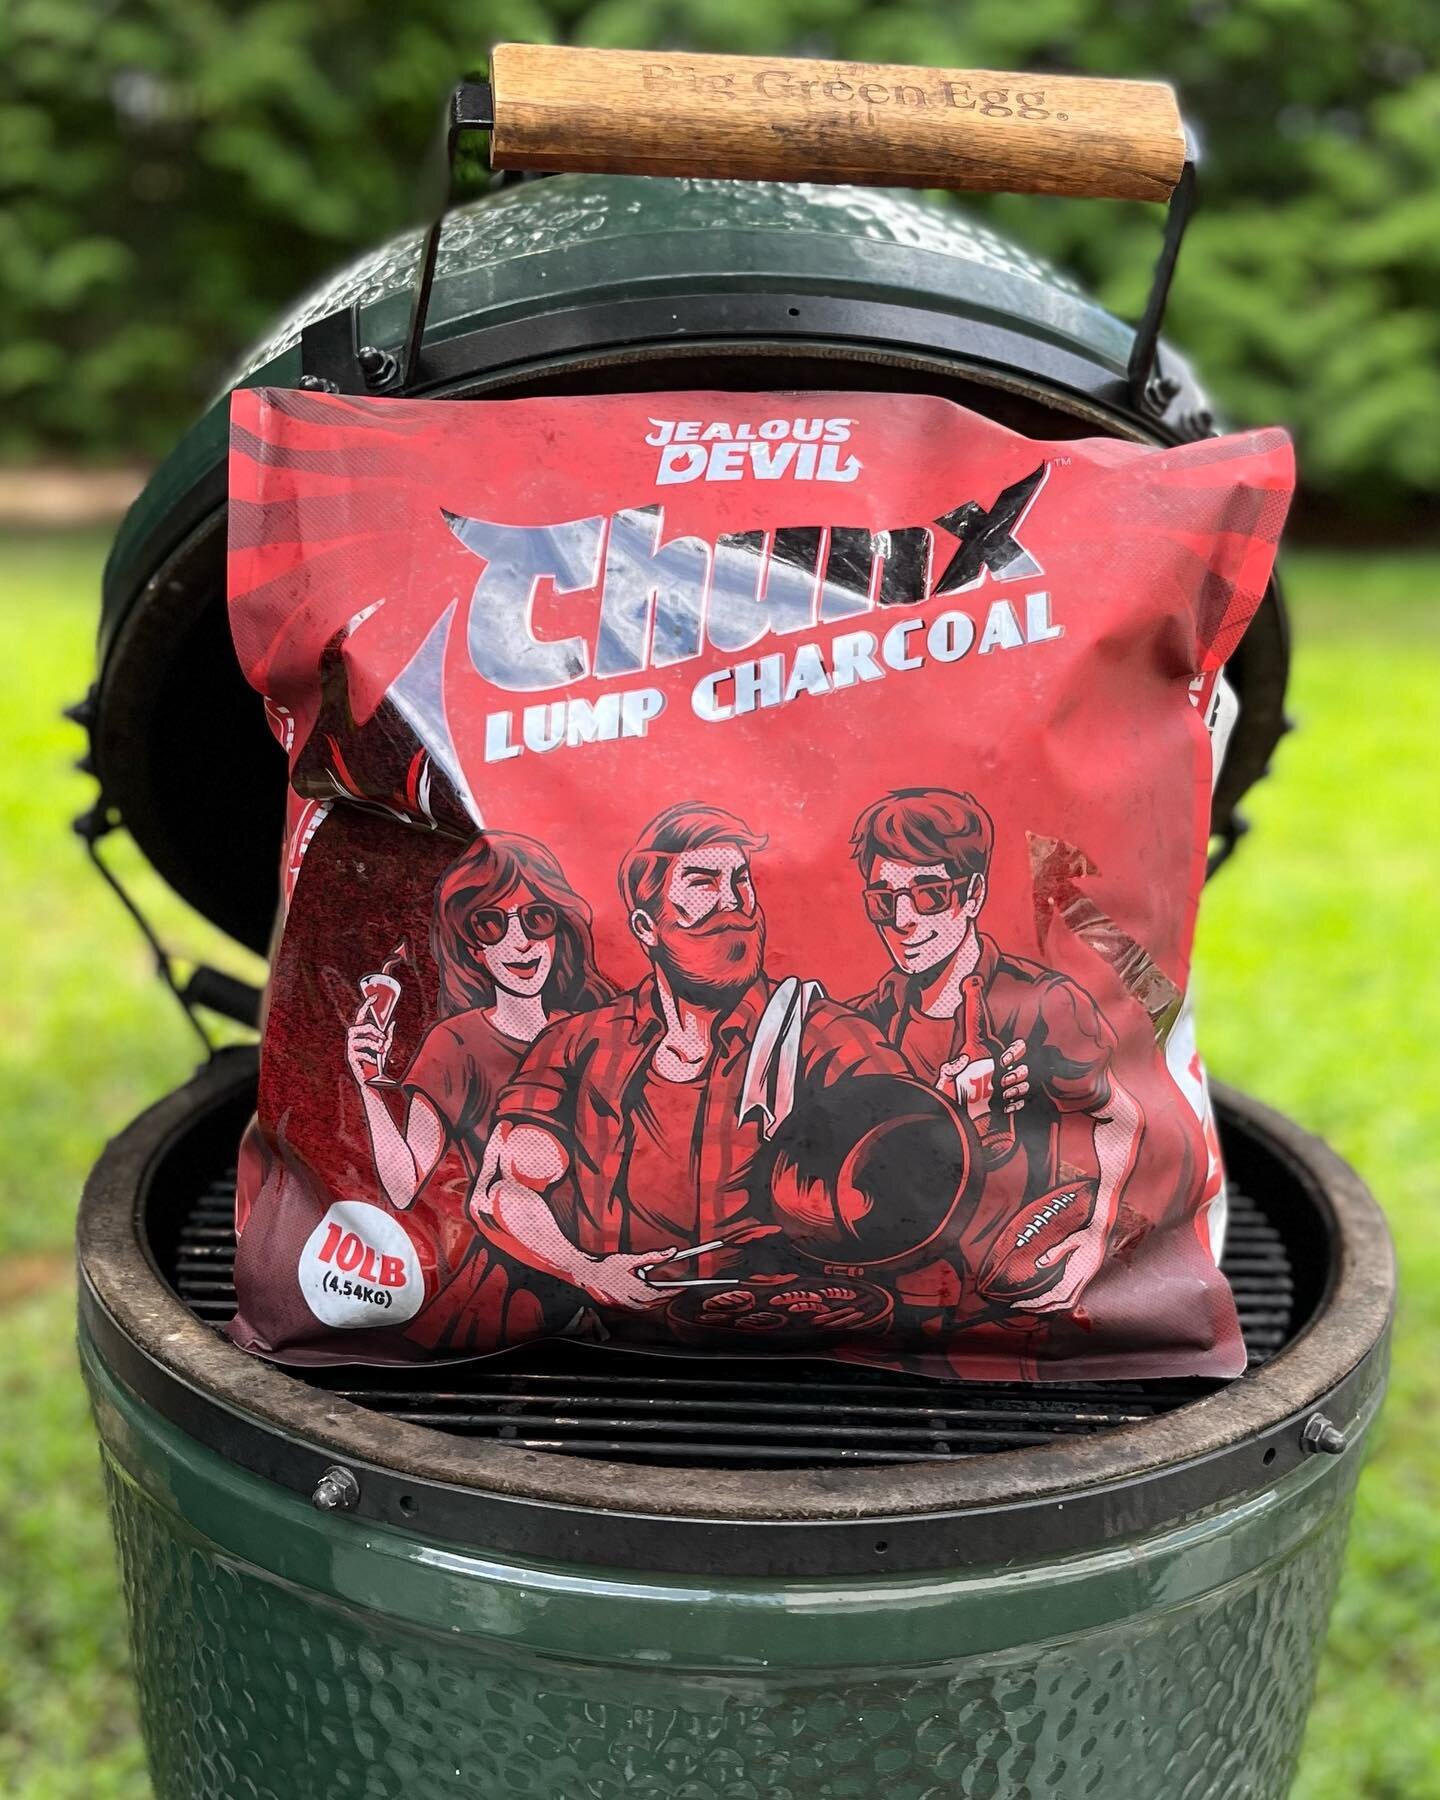 Smoke Meats not Crack 🤘🏻! Getting my fuel ready for the weekend. Nothing but the best for my @biggreenegg ! @jealousdevilcharcoal only in this household! Enjoy the rest of your week people! #teamjd #hotterthanhell #jealousdevilcharcoal #jealousdevi